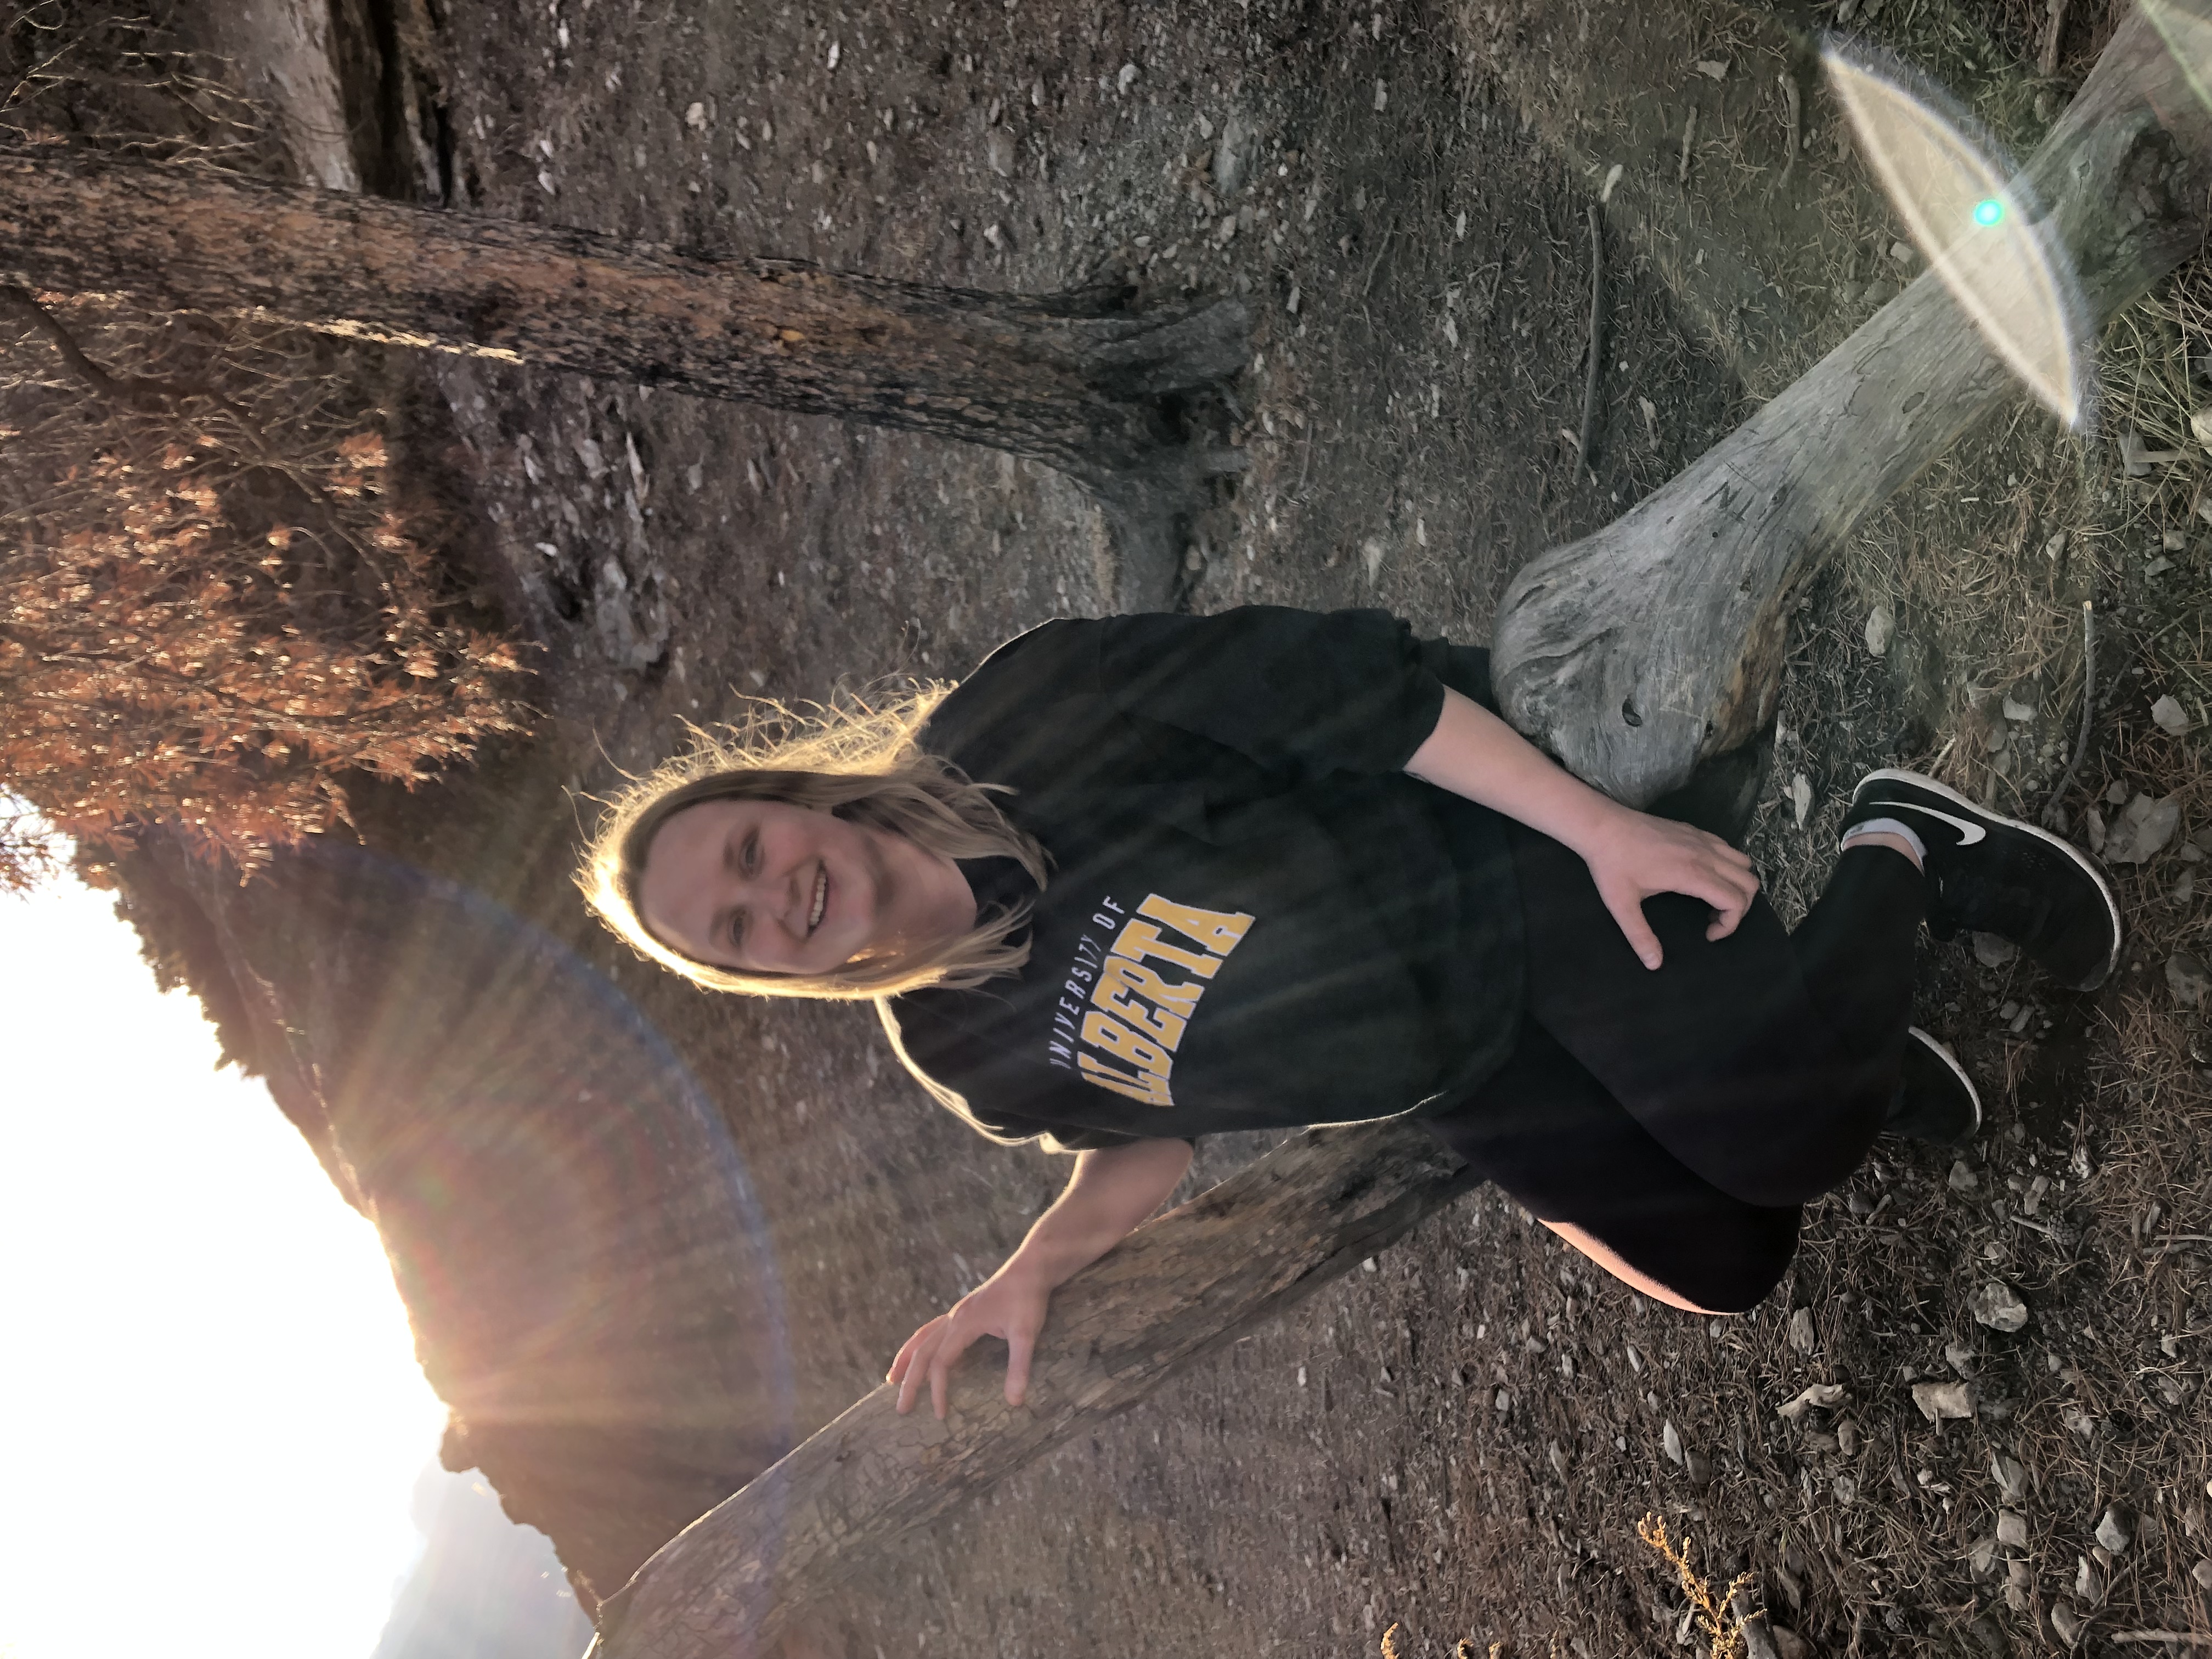 blonde woman wearing a green University of Alberta sweatshirt and black pants sits on tree in wooded area, smiles at camera